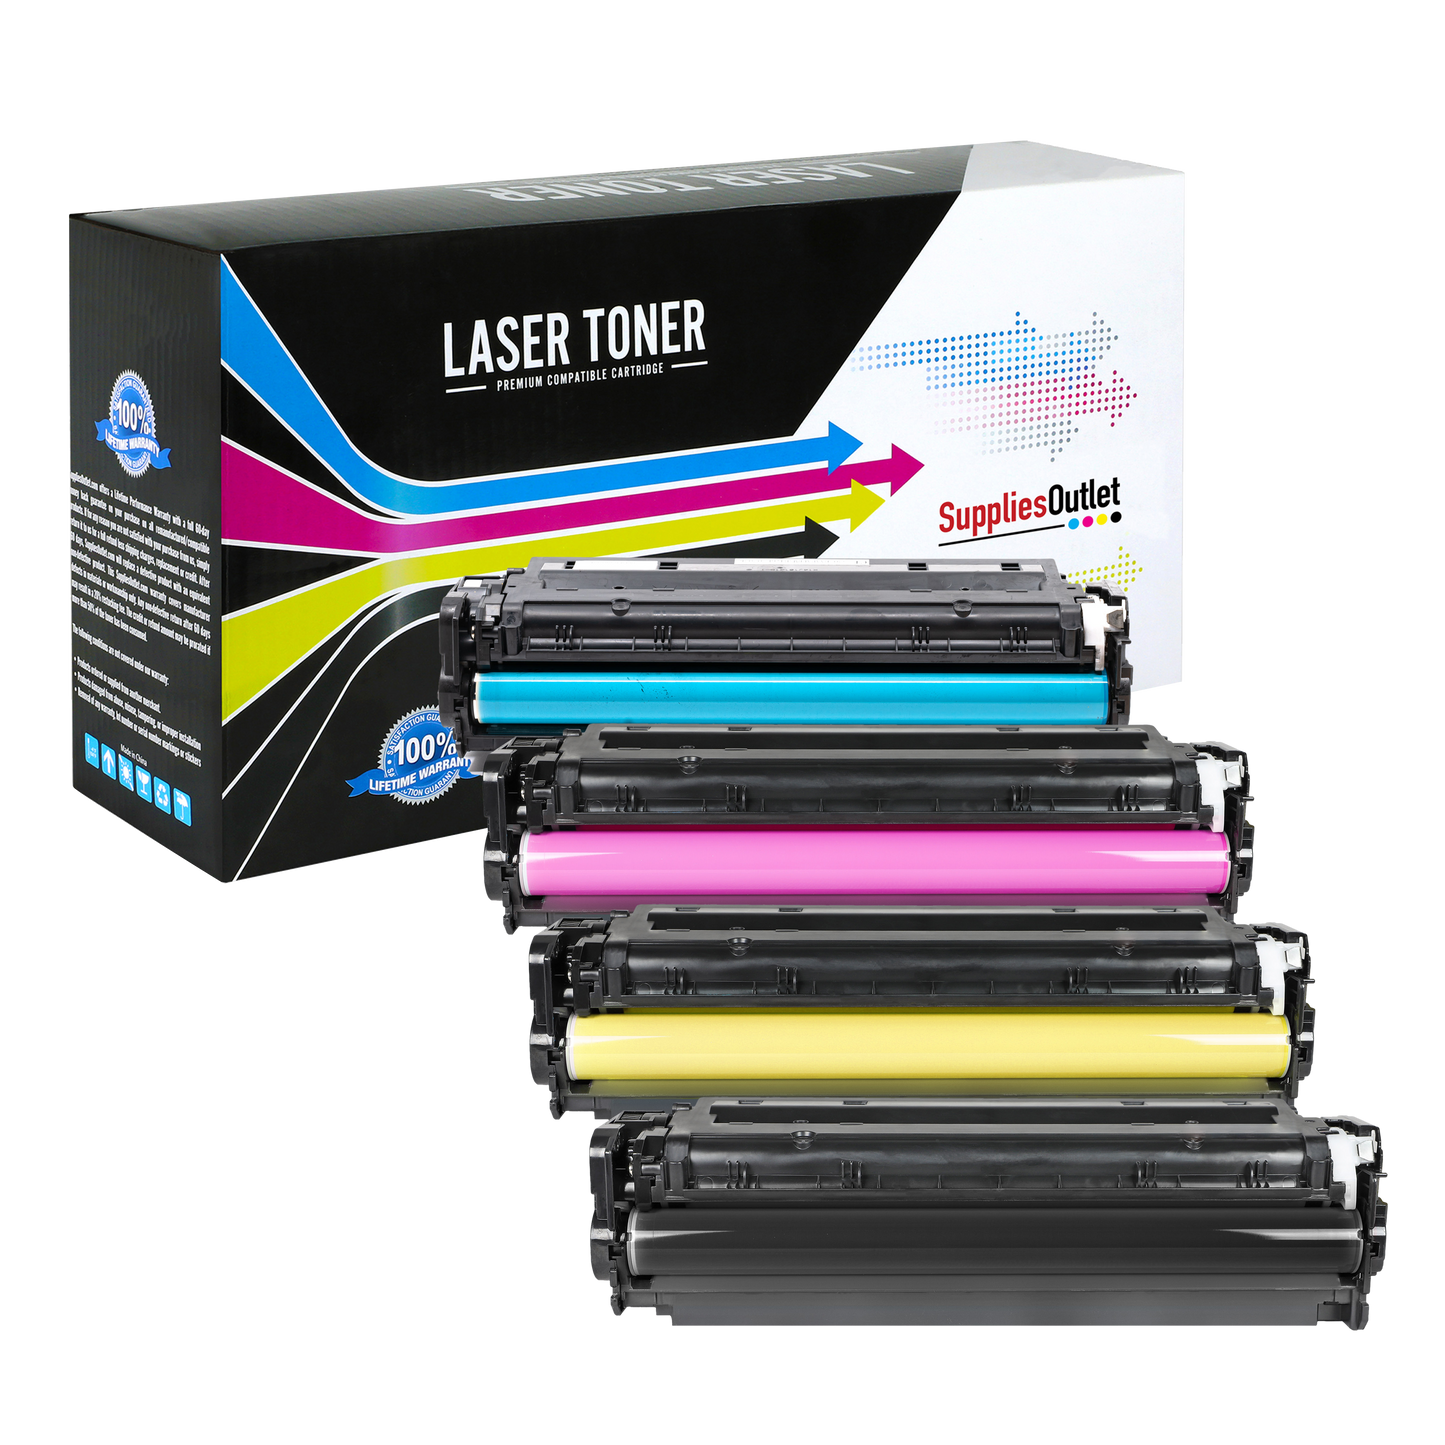 Compatible HP 304A All Colors Toner Cartridge - 3,500 Black - 2,800 Color Page Yield